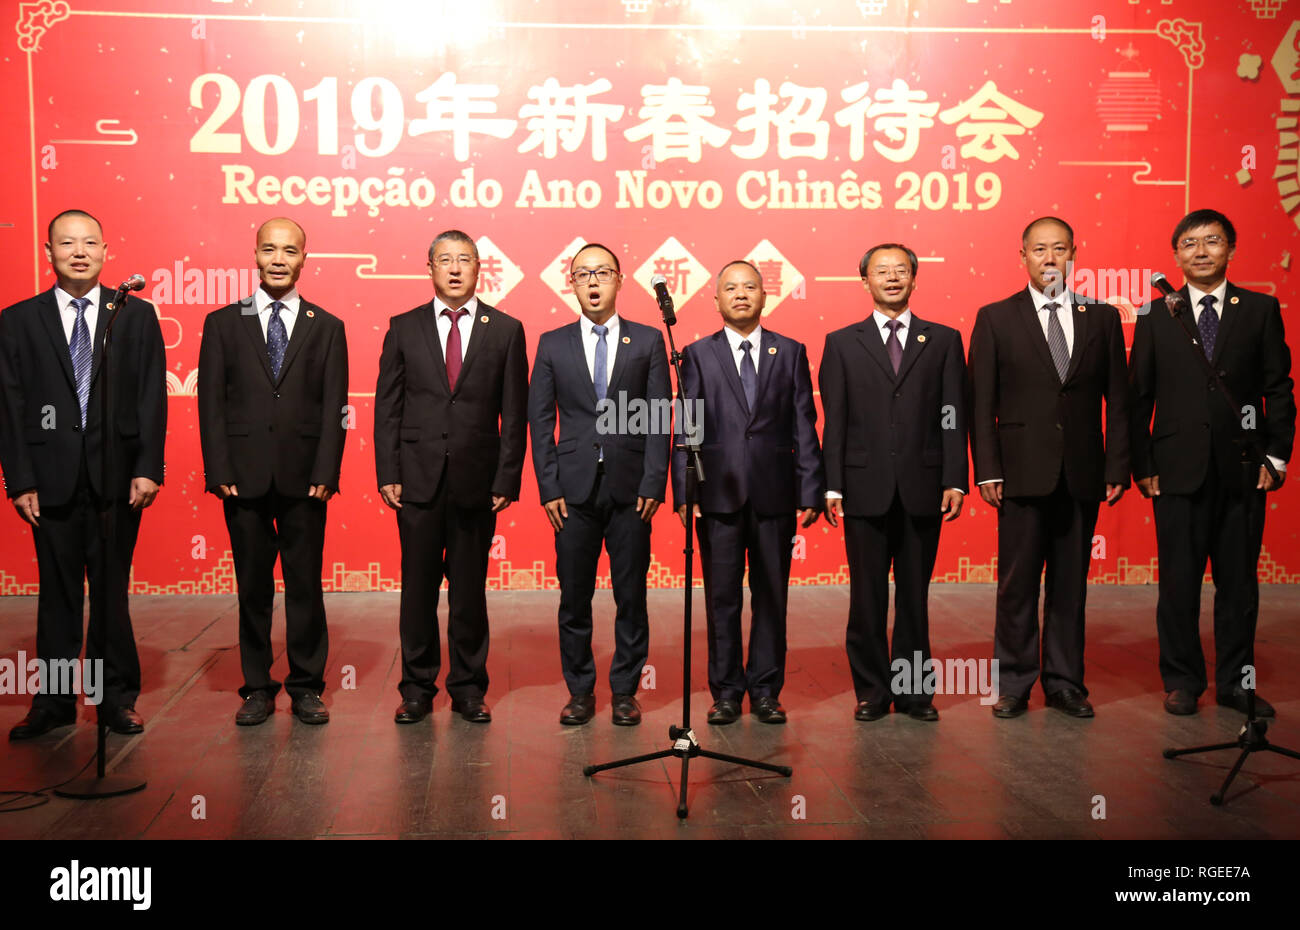 Sao Tome, Sao Tome and Principe. 28th Jan, 2019. Chinese agricultural experts sing a song on a reception for the upcoming Chinese Spring Festival in Sao Tome, Sao Tome and Principe, Jan. 28, 2019. The Chinese community in Sao Tome and Principe on Monday held celebrations ahead of the Spring Festival, which falls on Feb. 5 this year. Credit: Leo Pedro/Xinhua/Alamy Live News Stock Photo